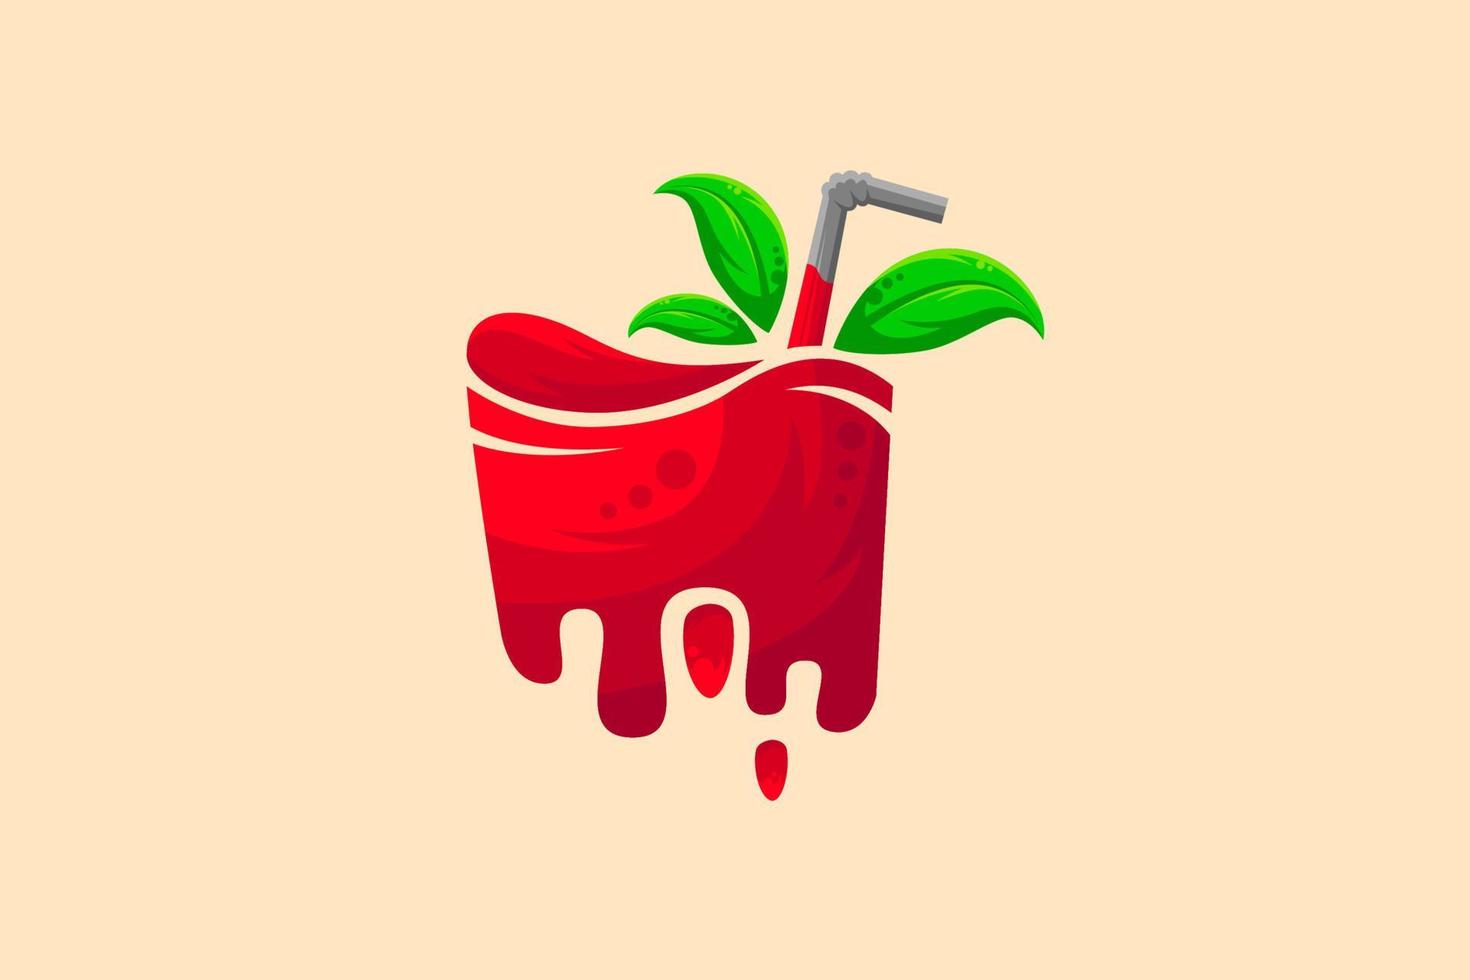 juice vector. you can use it as your logo or business icon vector